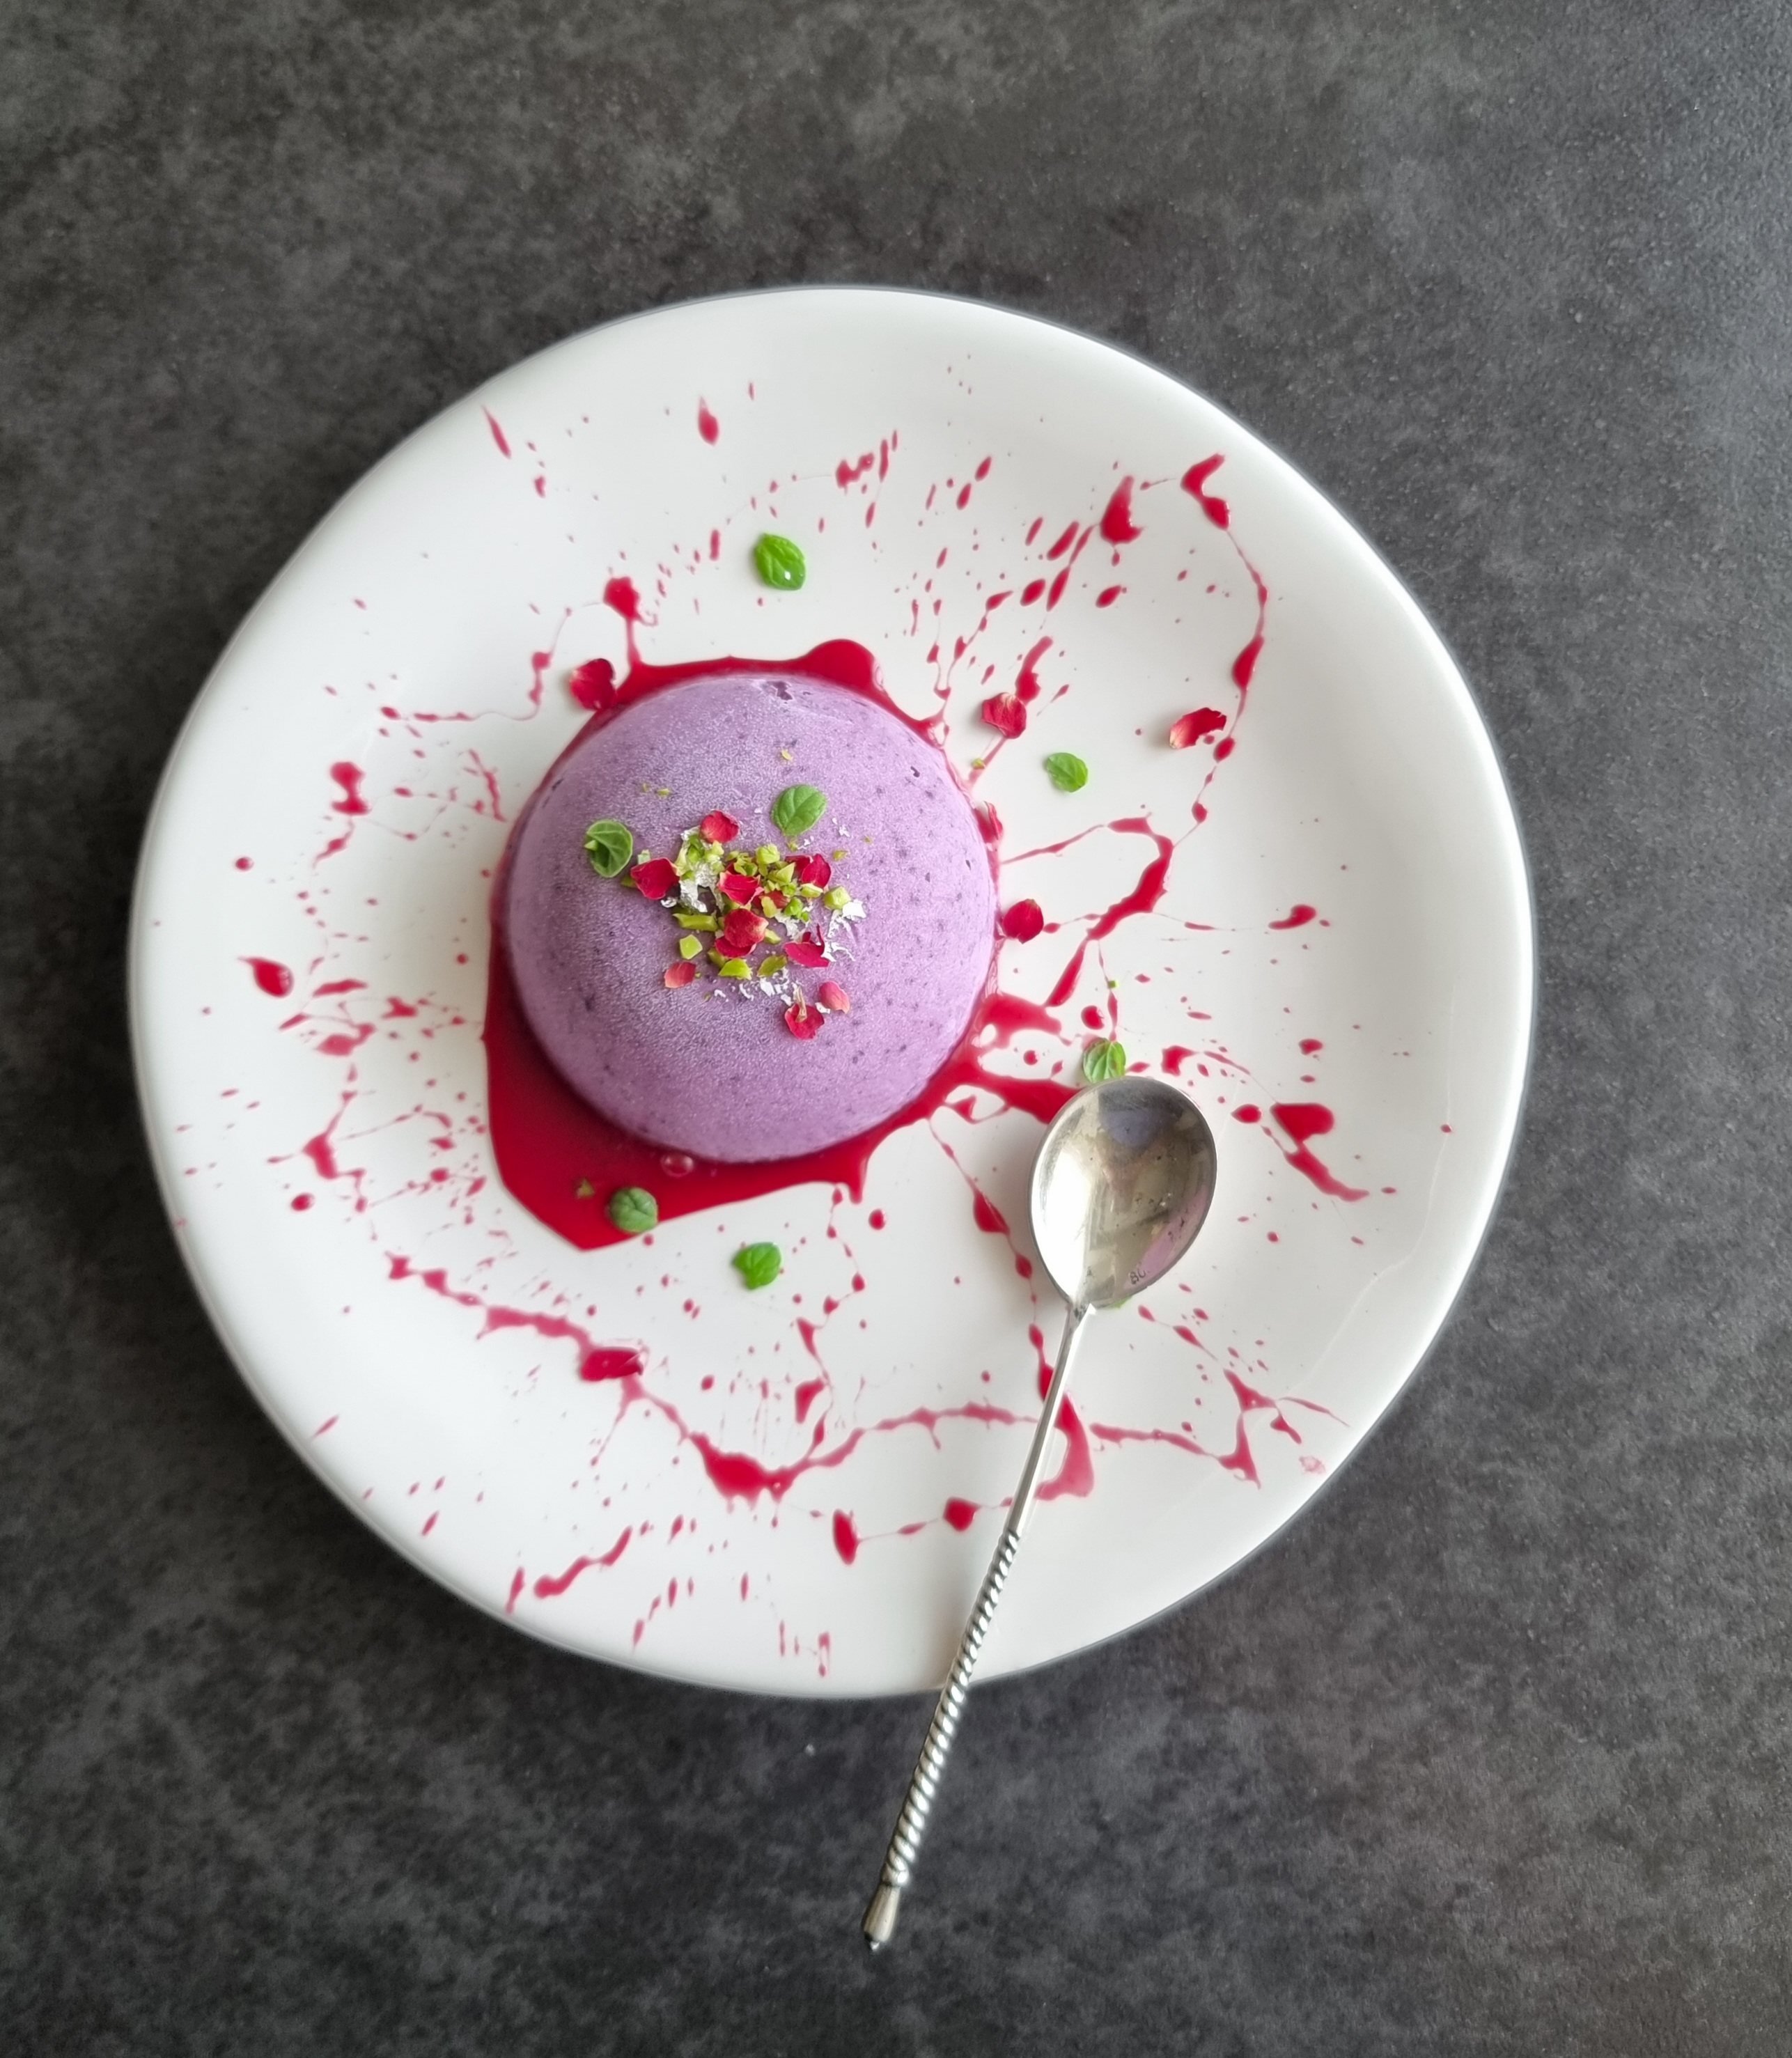 Surabhi Sehgal’s jamun froyo with a painterly effect made with sauces.  Photo: Surabhi Sehgal